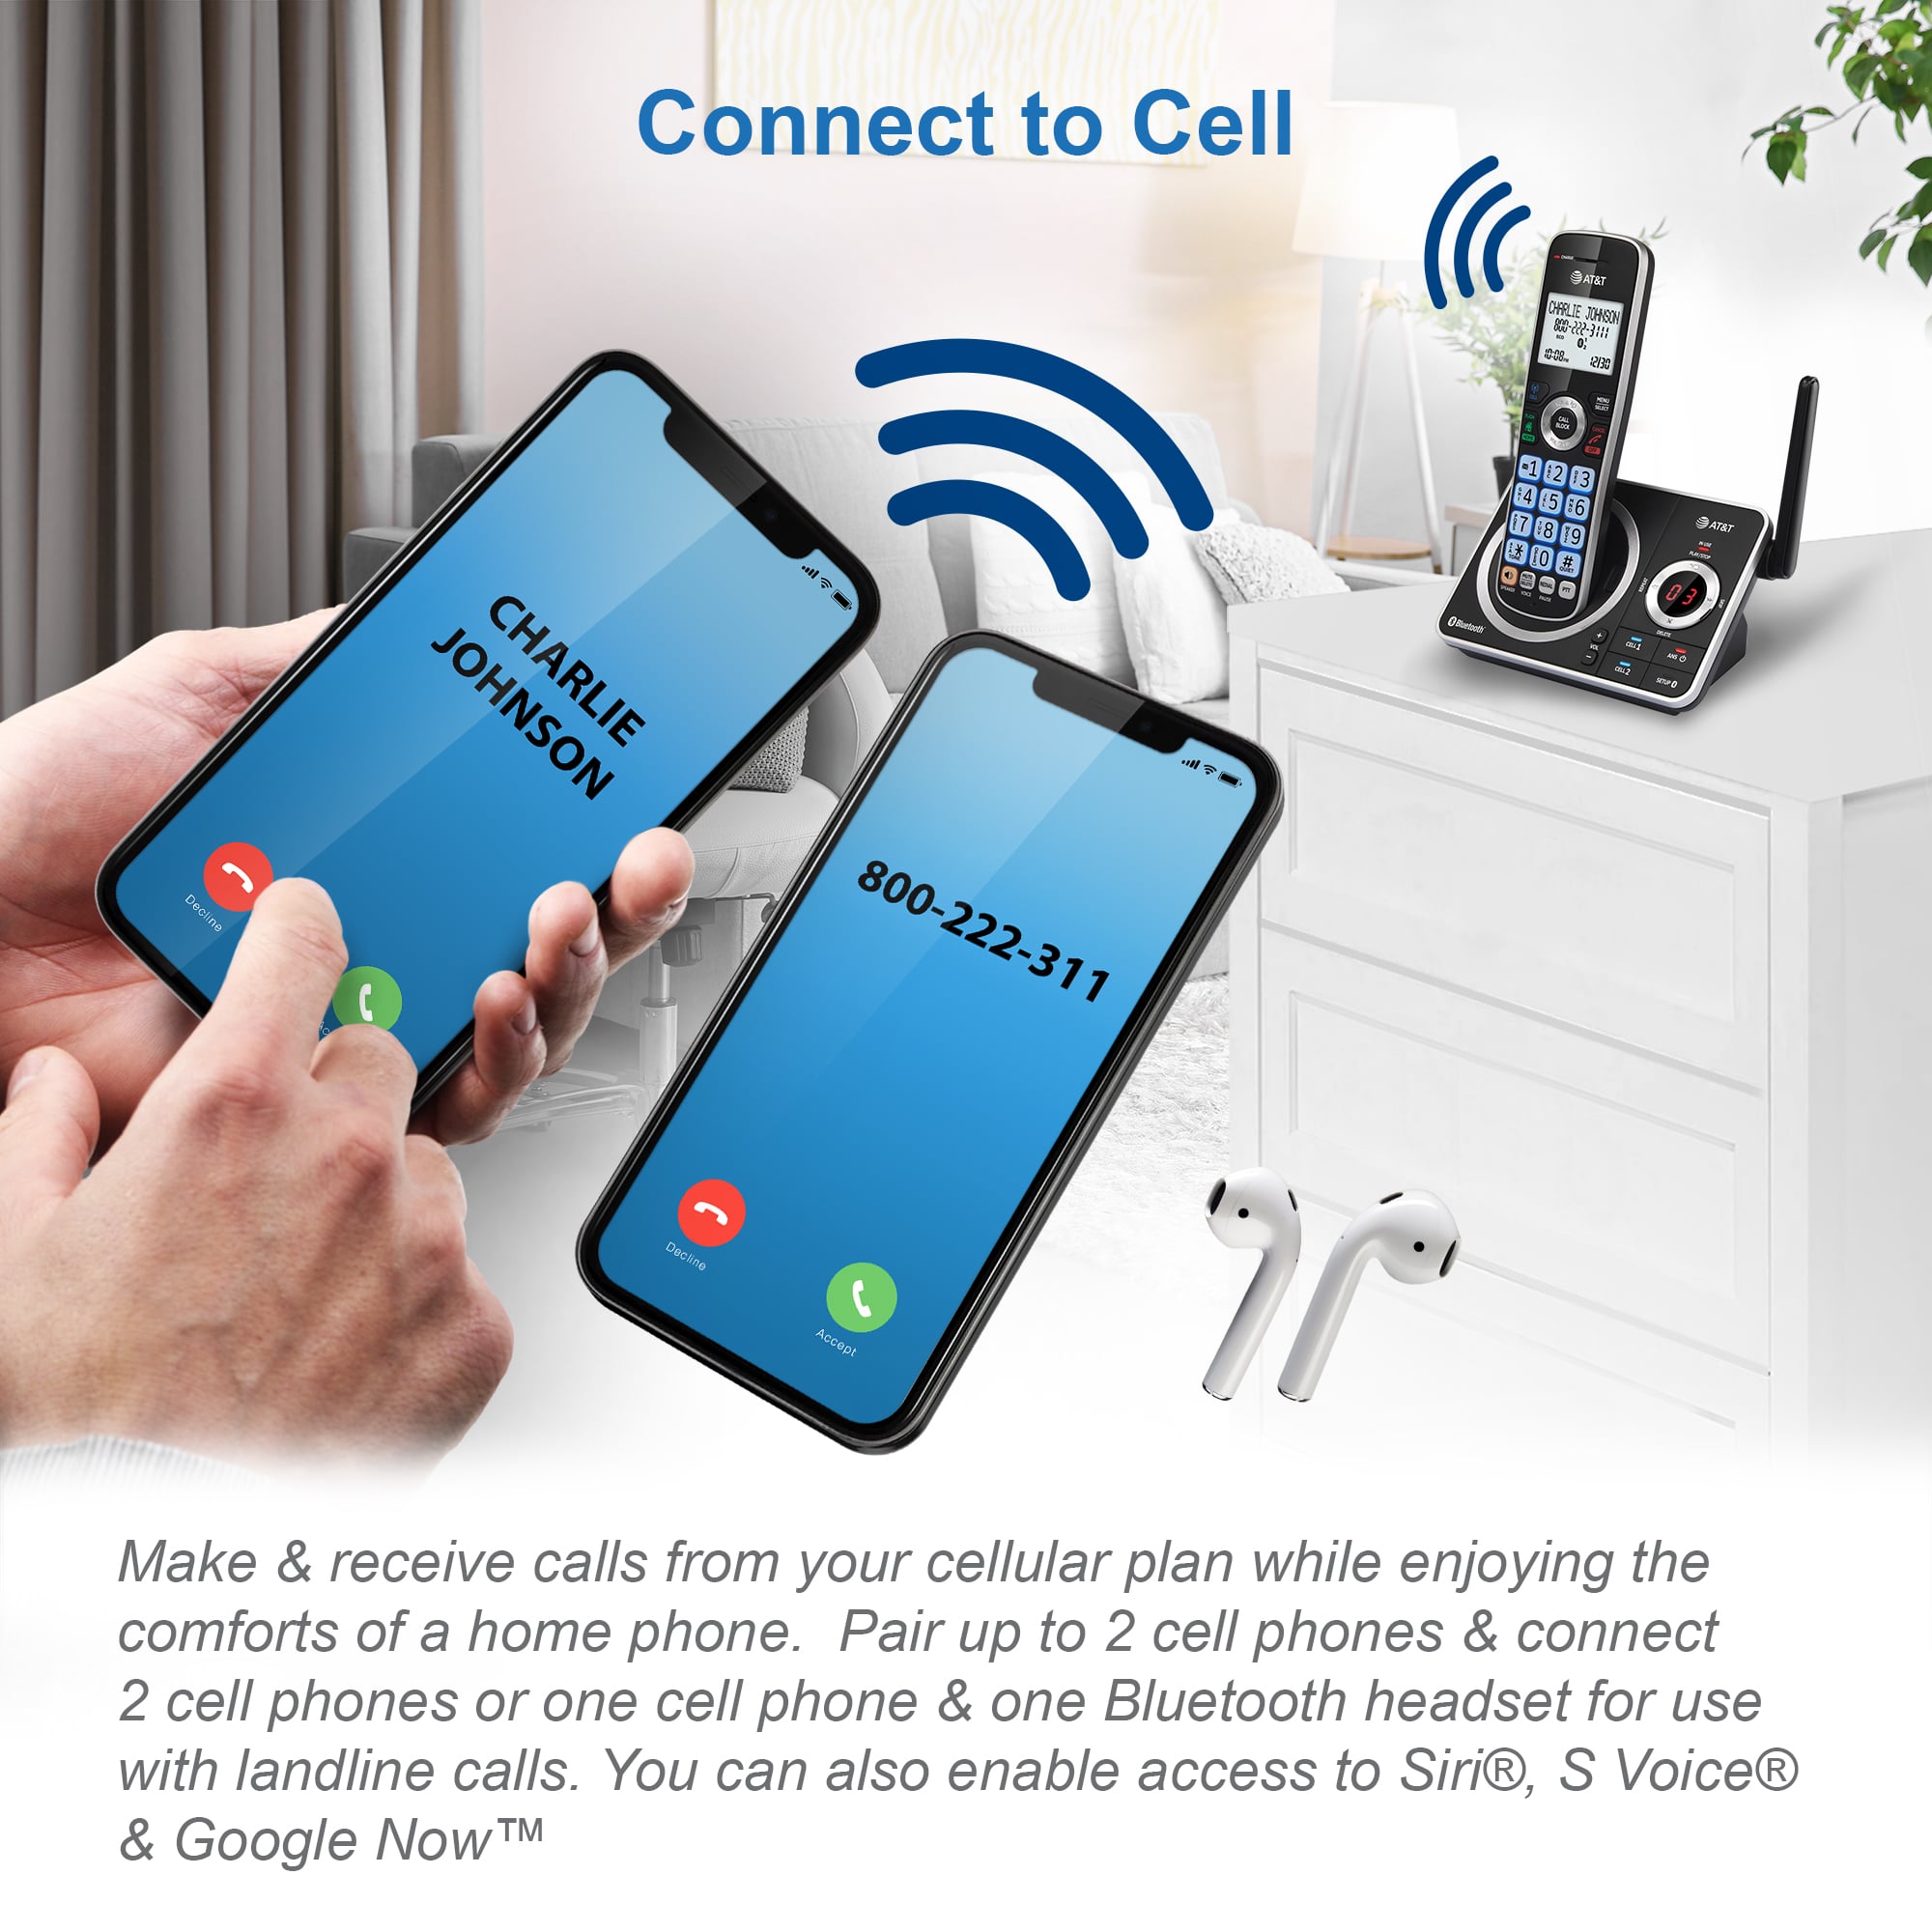 4 Handset Answering System with Connect to Cell™ - view 6